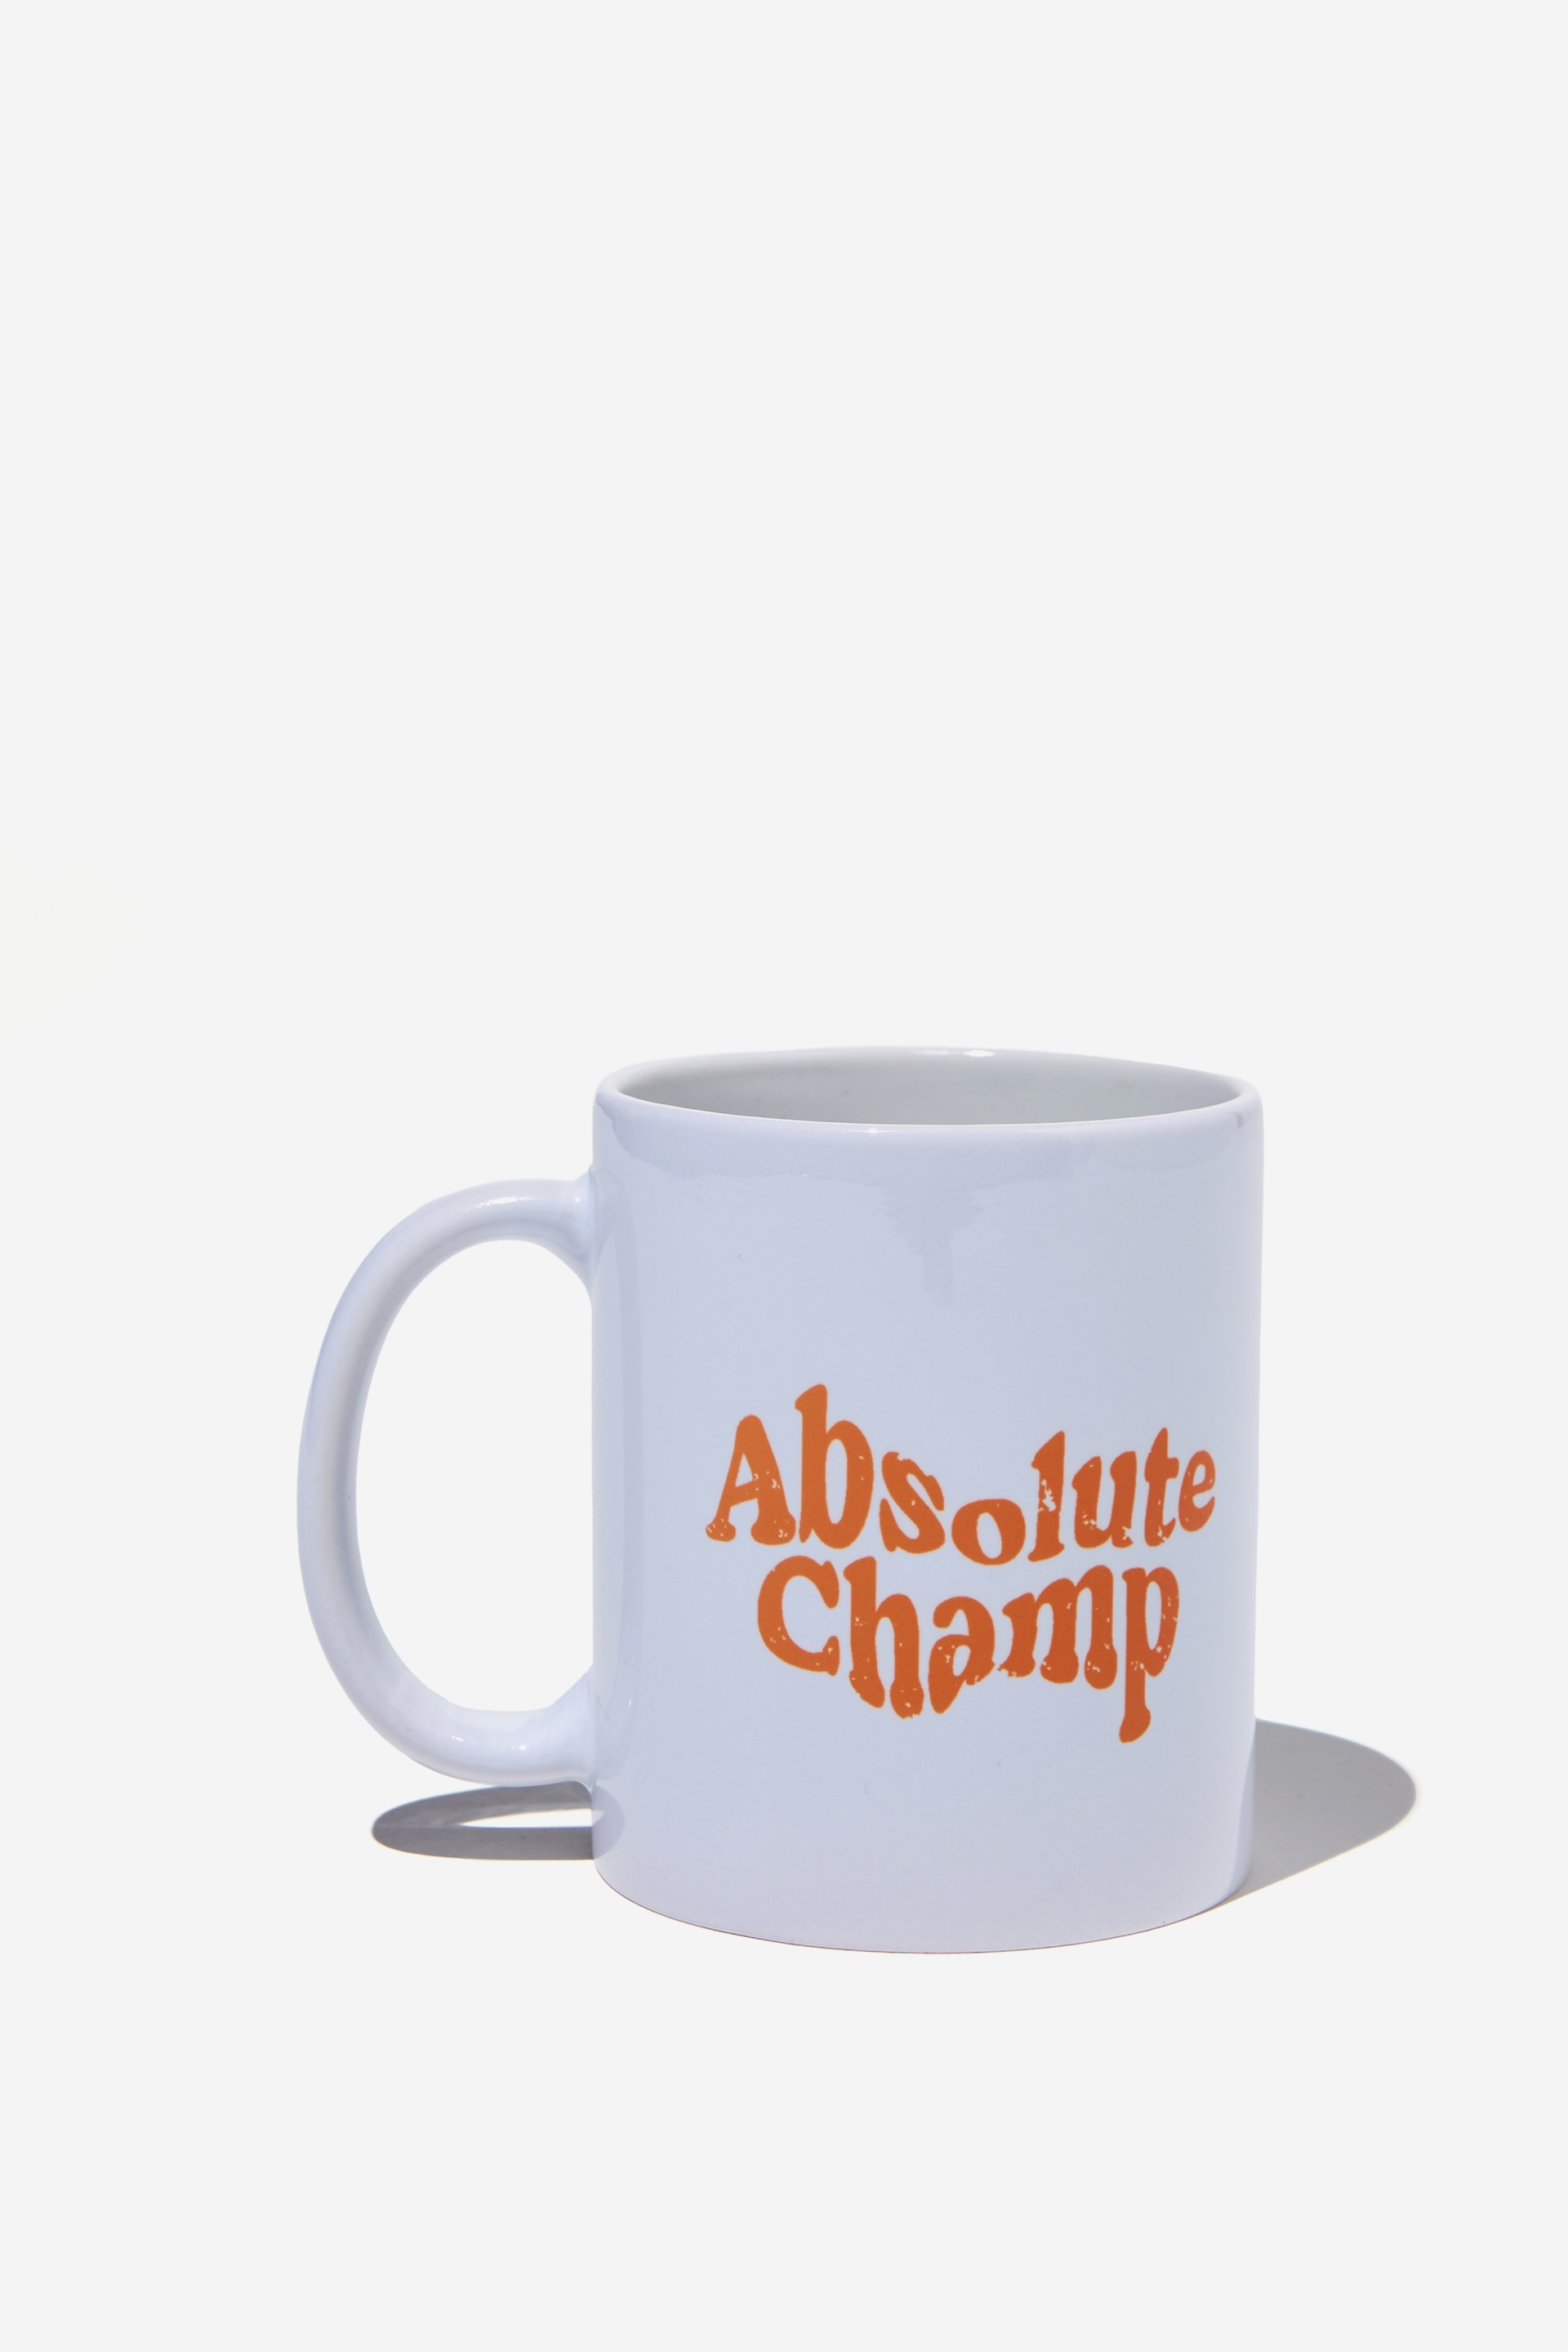 Typo - Personalised Father’s Day Mug - Absolute champ